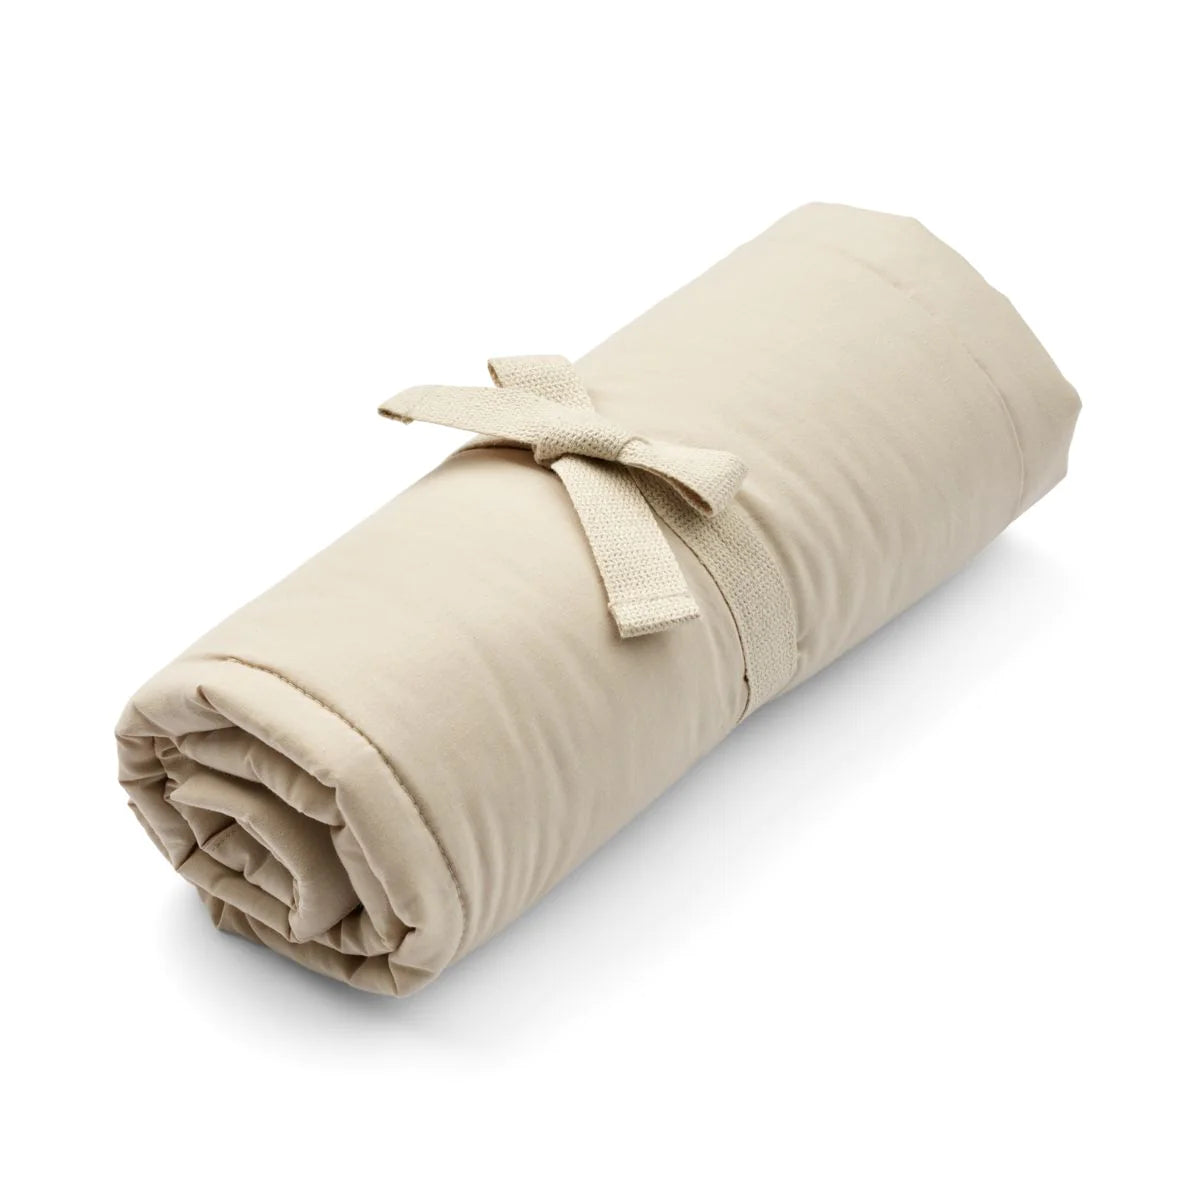 Adonna Transportable Activity Blanket - Downtown